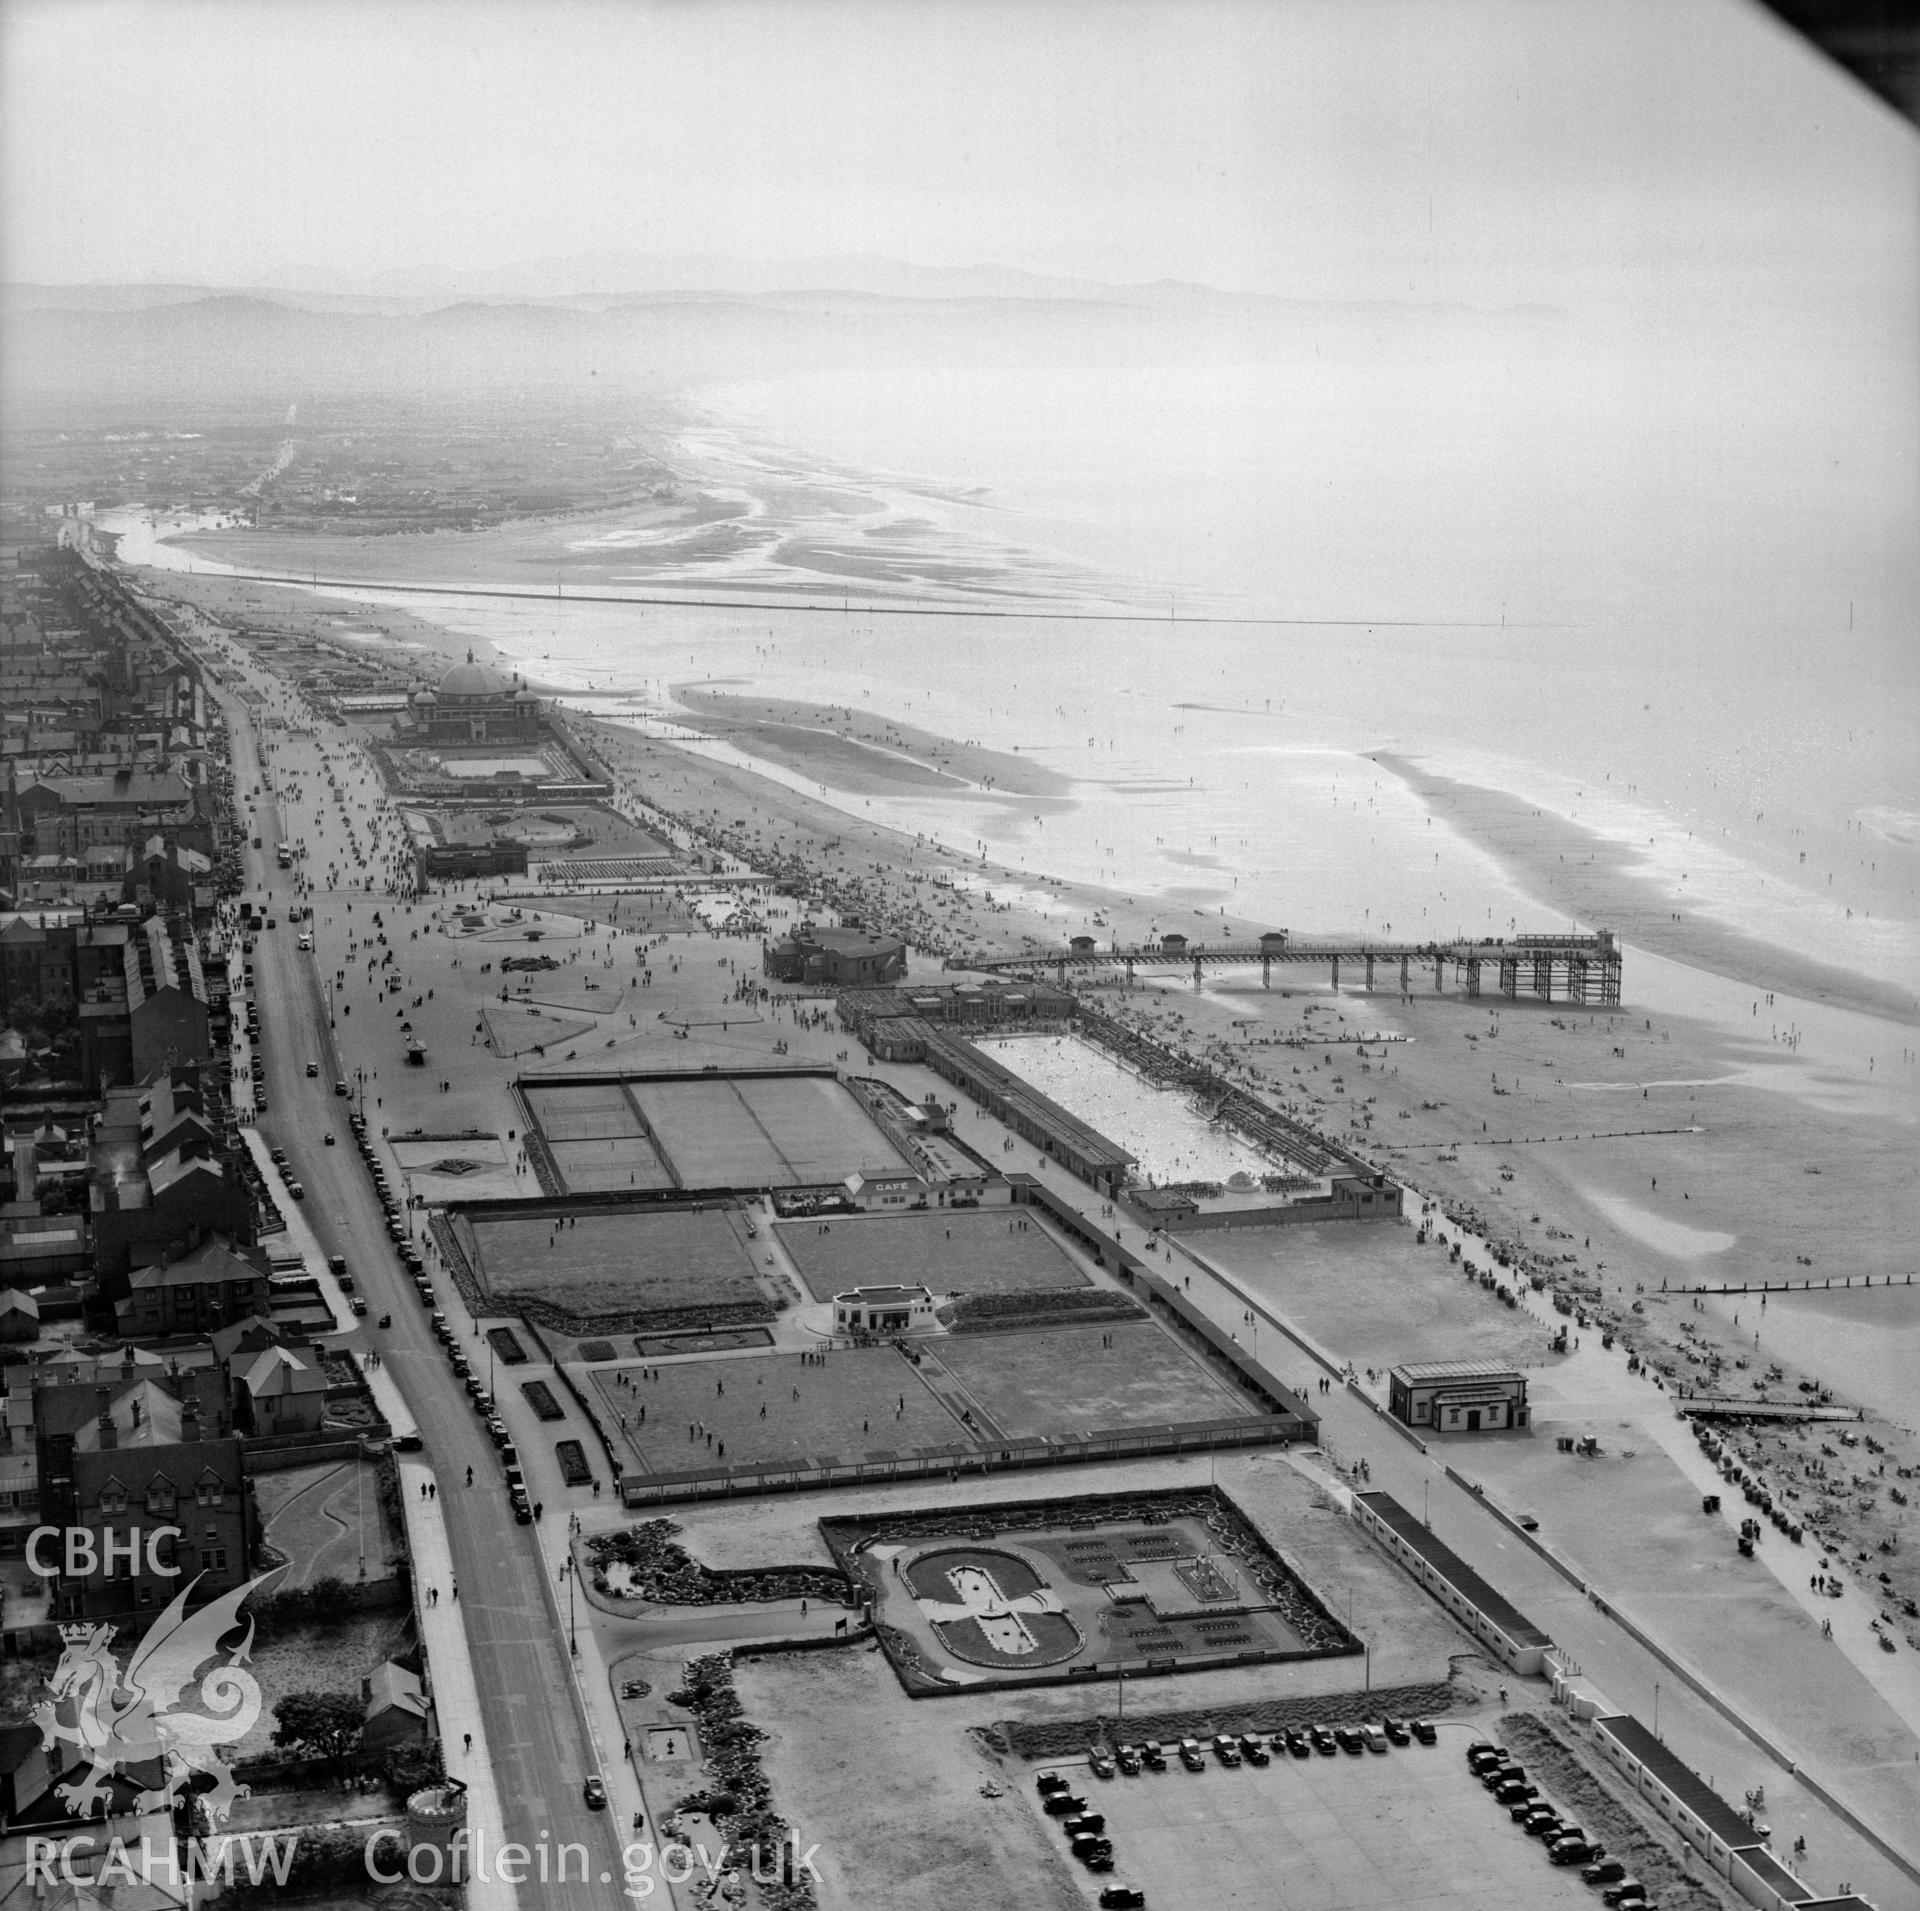 View of Rhyl showing promenade gardens, swimming pool and pier